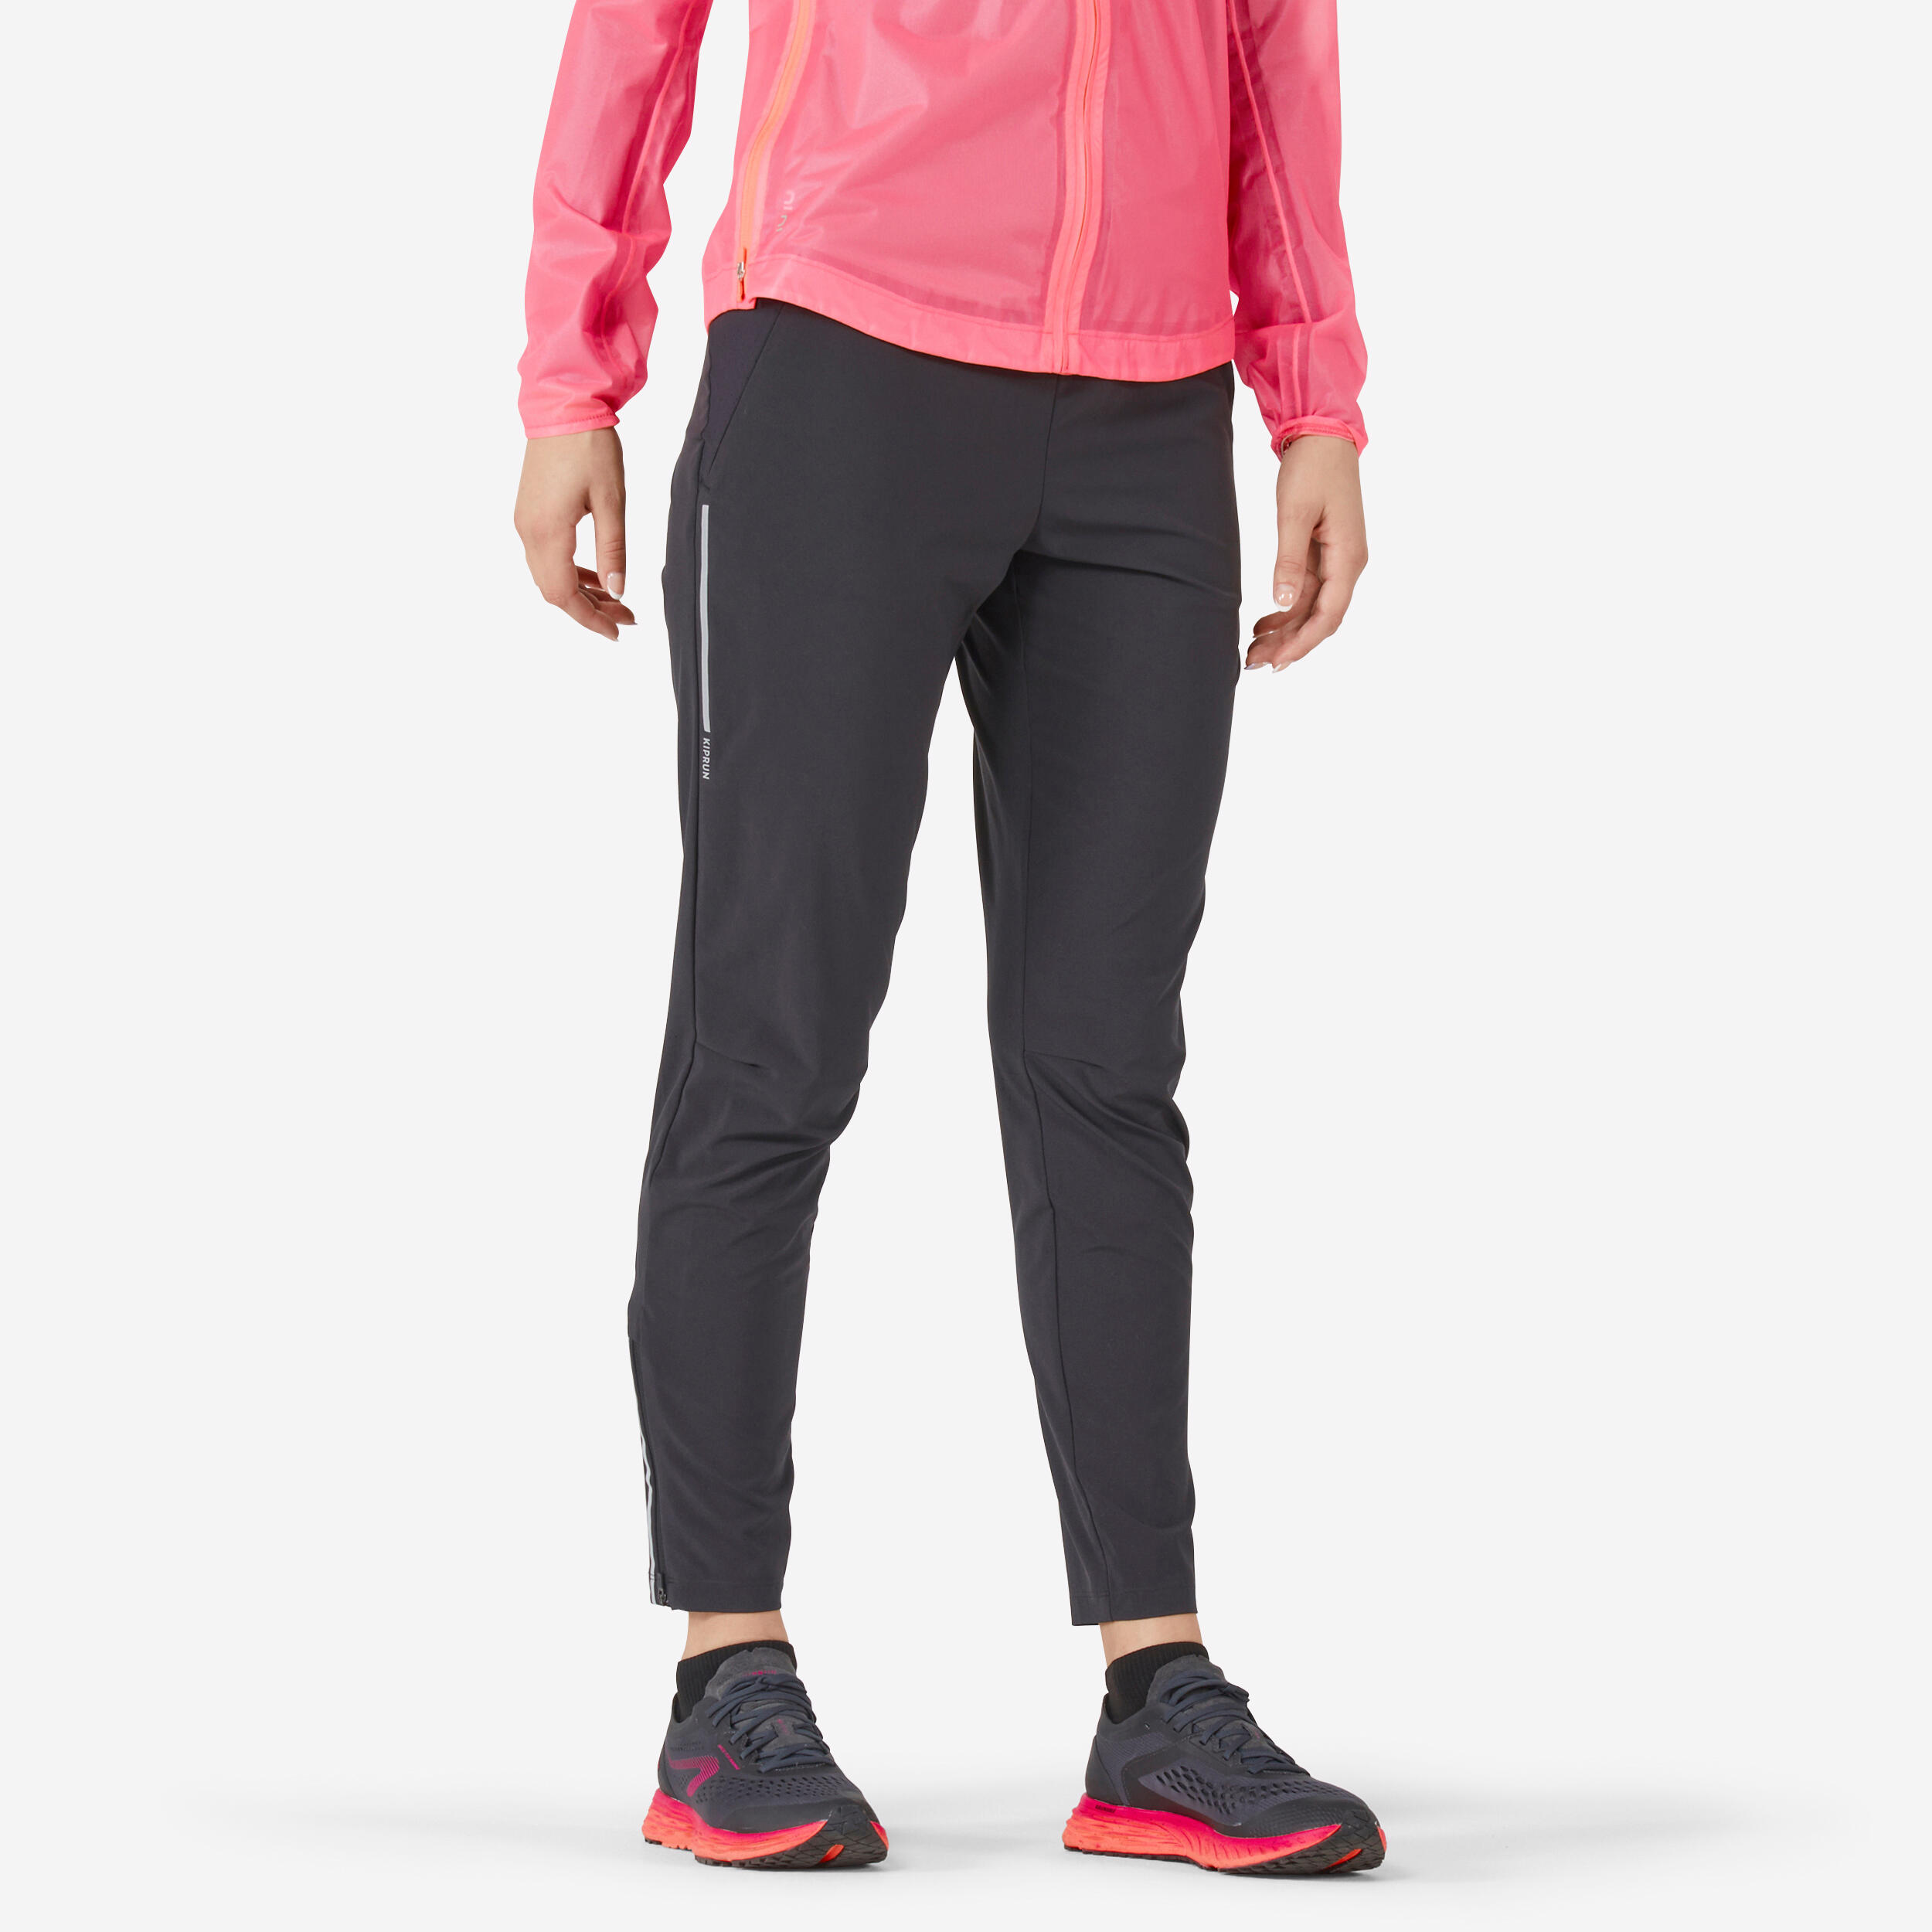 Women's Fitted Running Pants - 900 Black